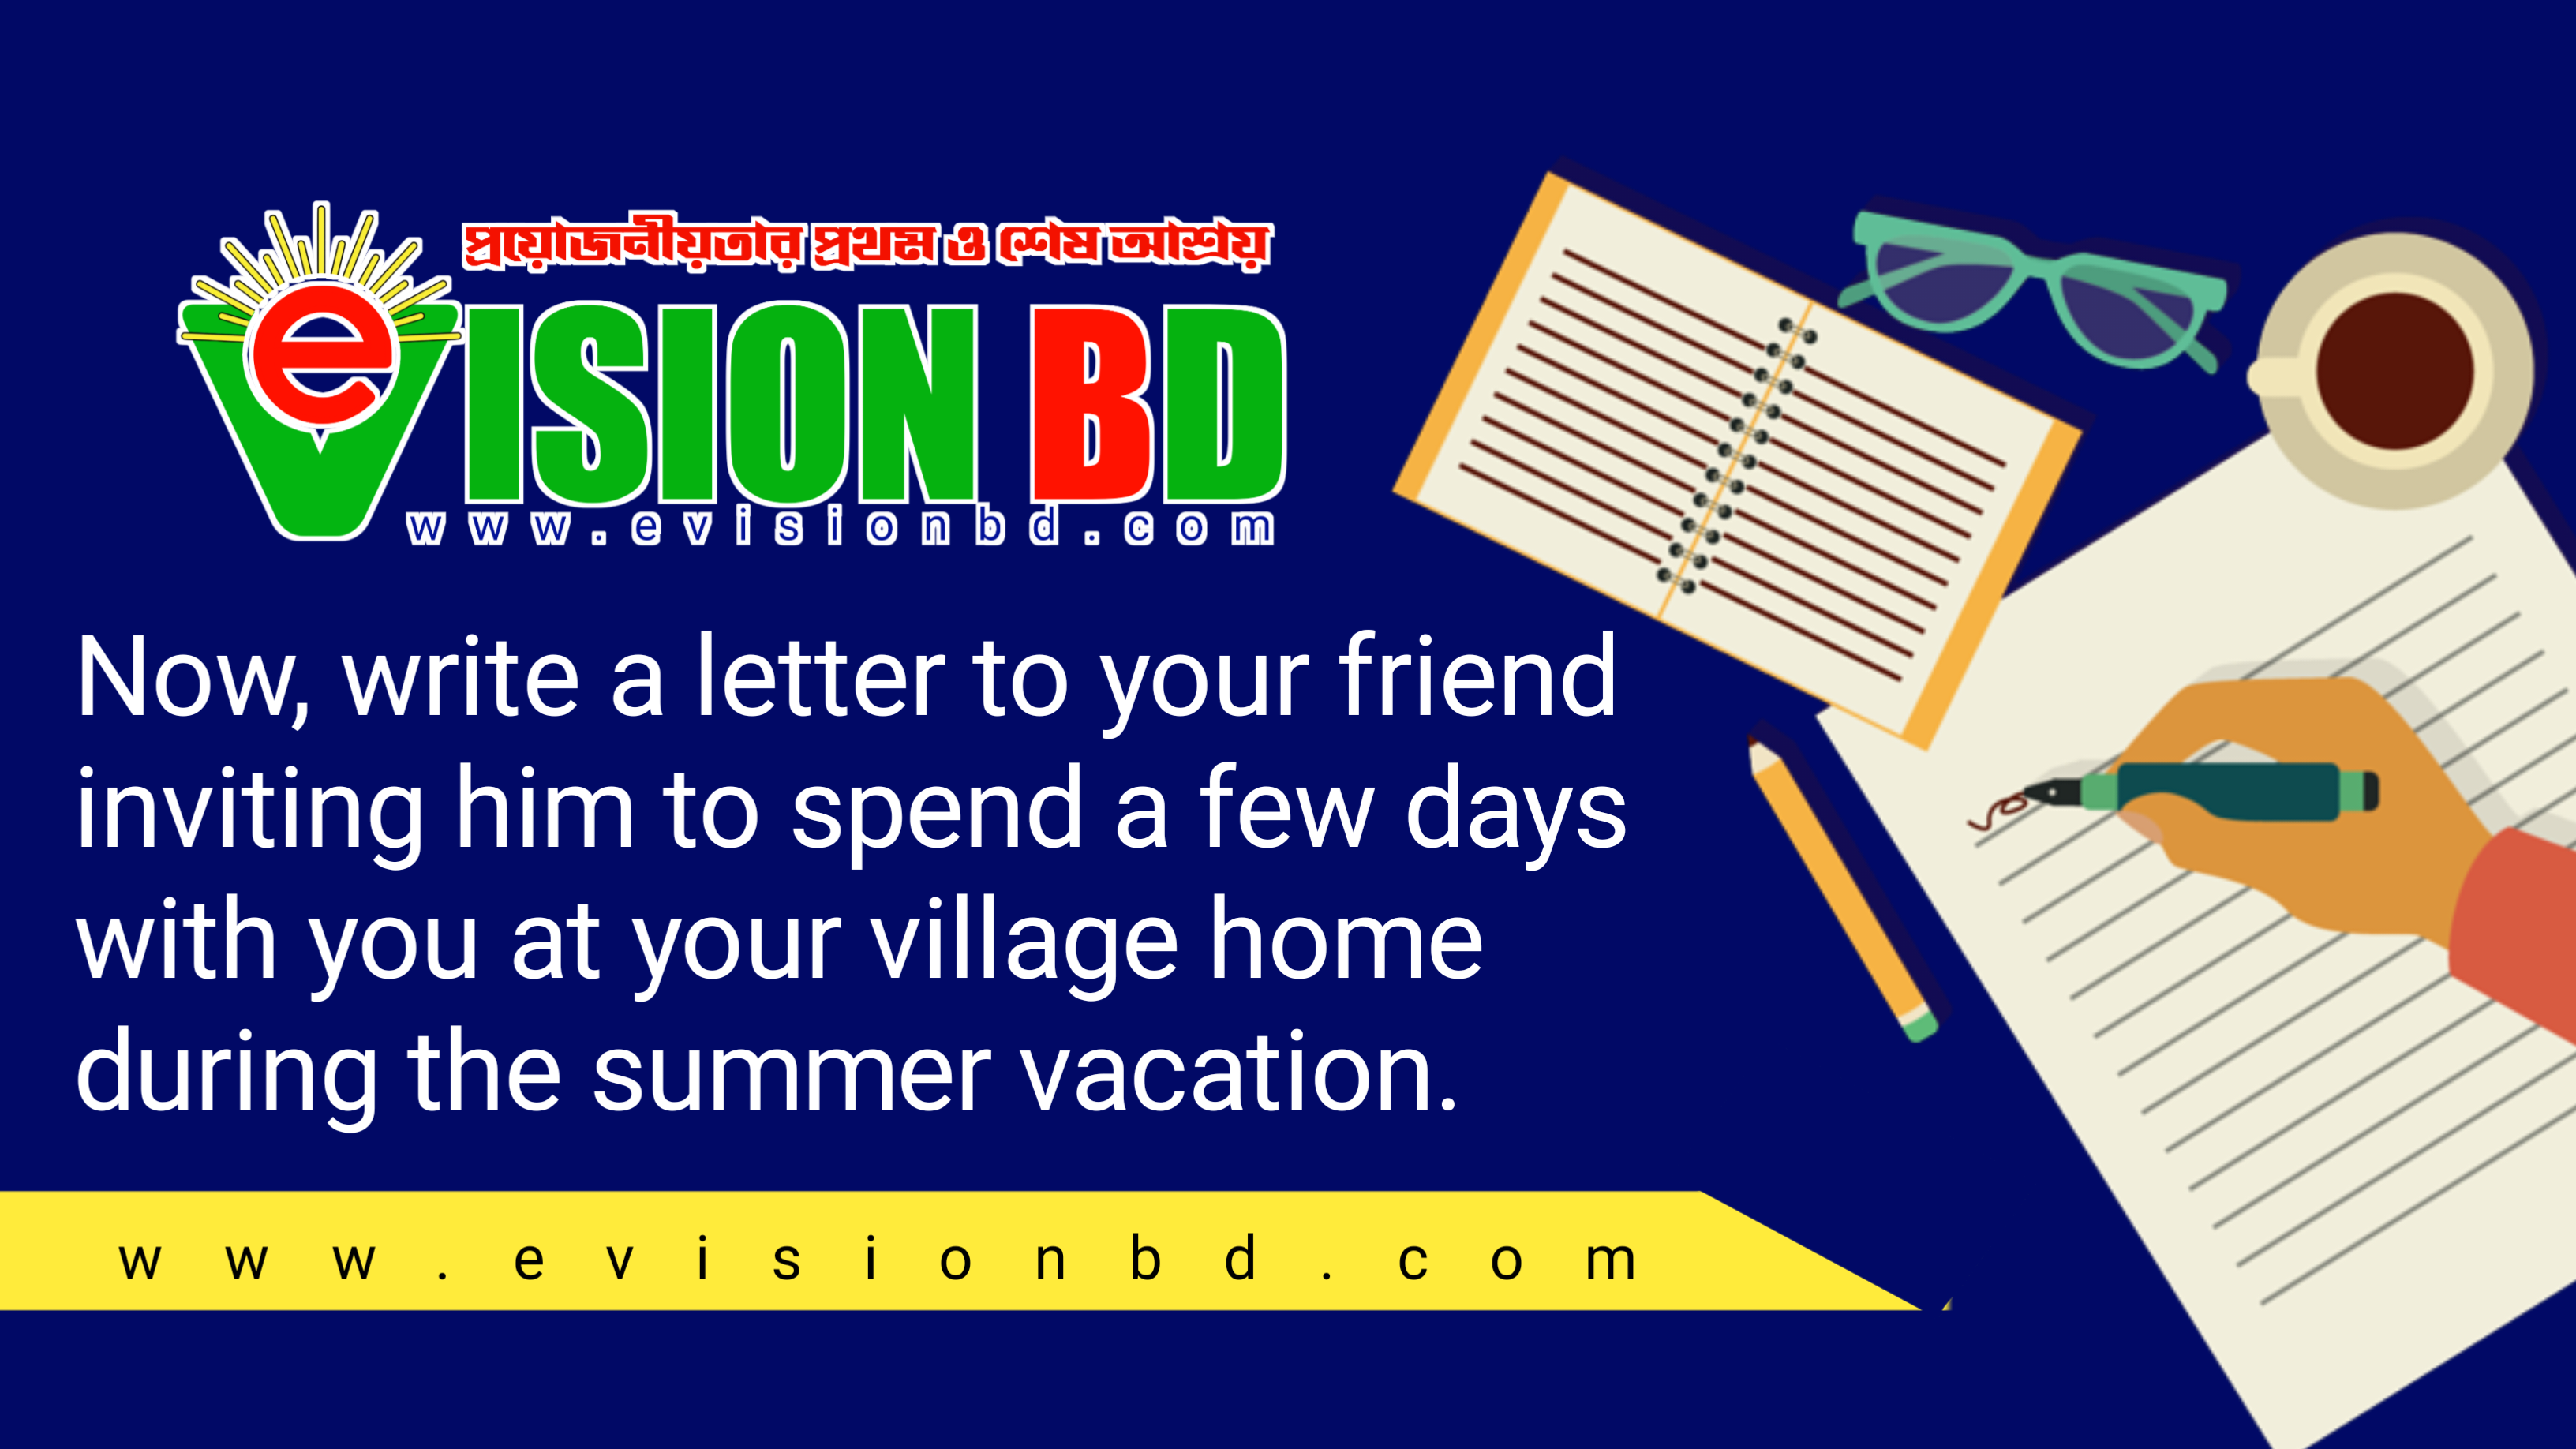 Now, write a letter to your friend inviting him to spend a few days with you at your village home during the summer vacation.